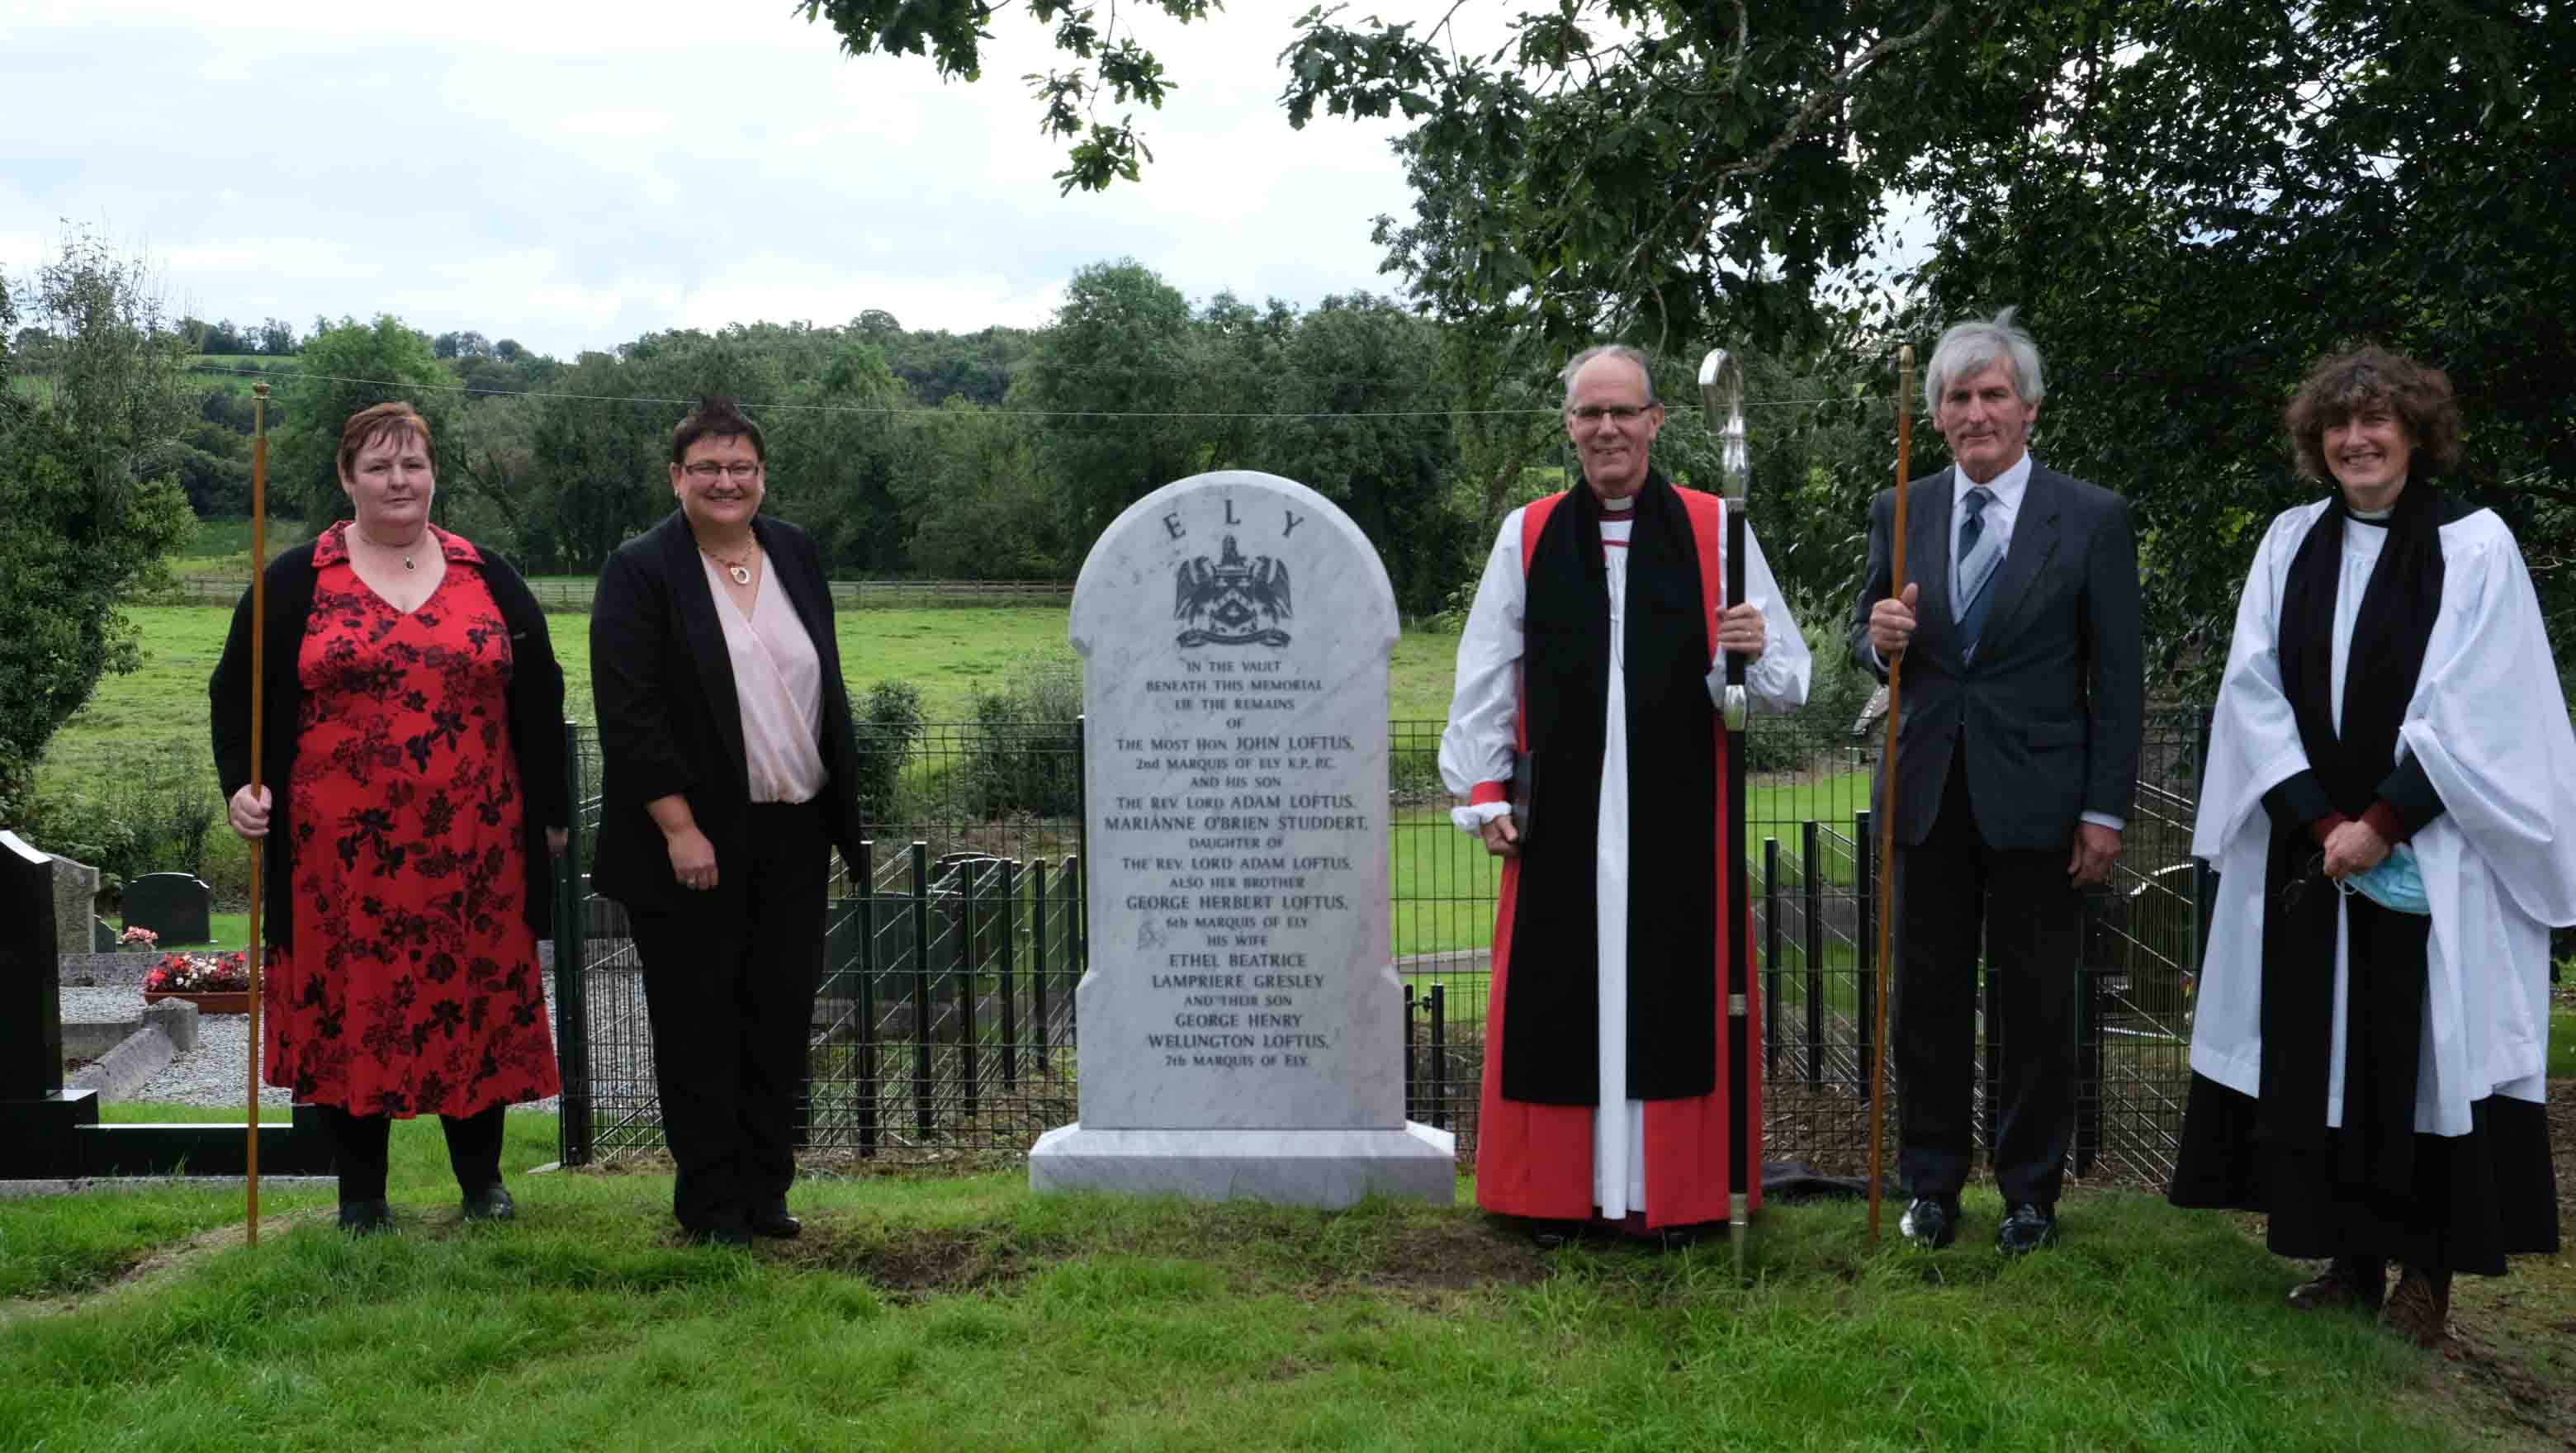 Attending the unveiling of the Ely memorial were (from left): Elizabeth McClelland, Churchwarden; Elmarie Swanepoel, Programme Manager of the Lough Erne Landscape Partnership; the Bishop of Clogher, the Right Revd Dr Ian Ellis; Richard Harkness, Churchwarden; and the Revd Stephanie Woods, in charge of the parish of Inishmacsaint.